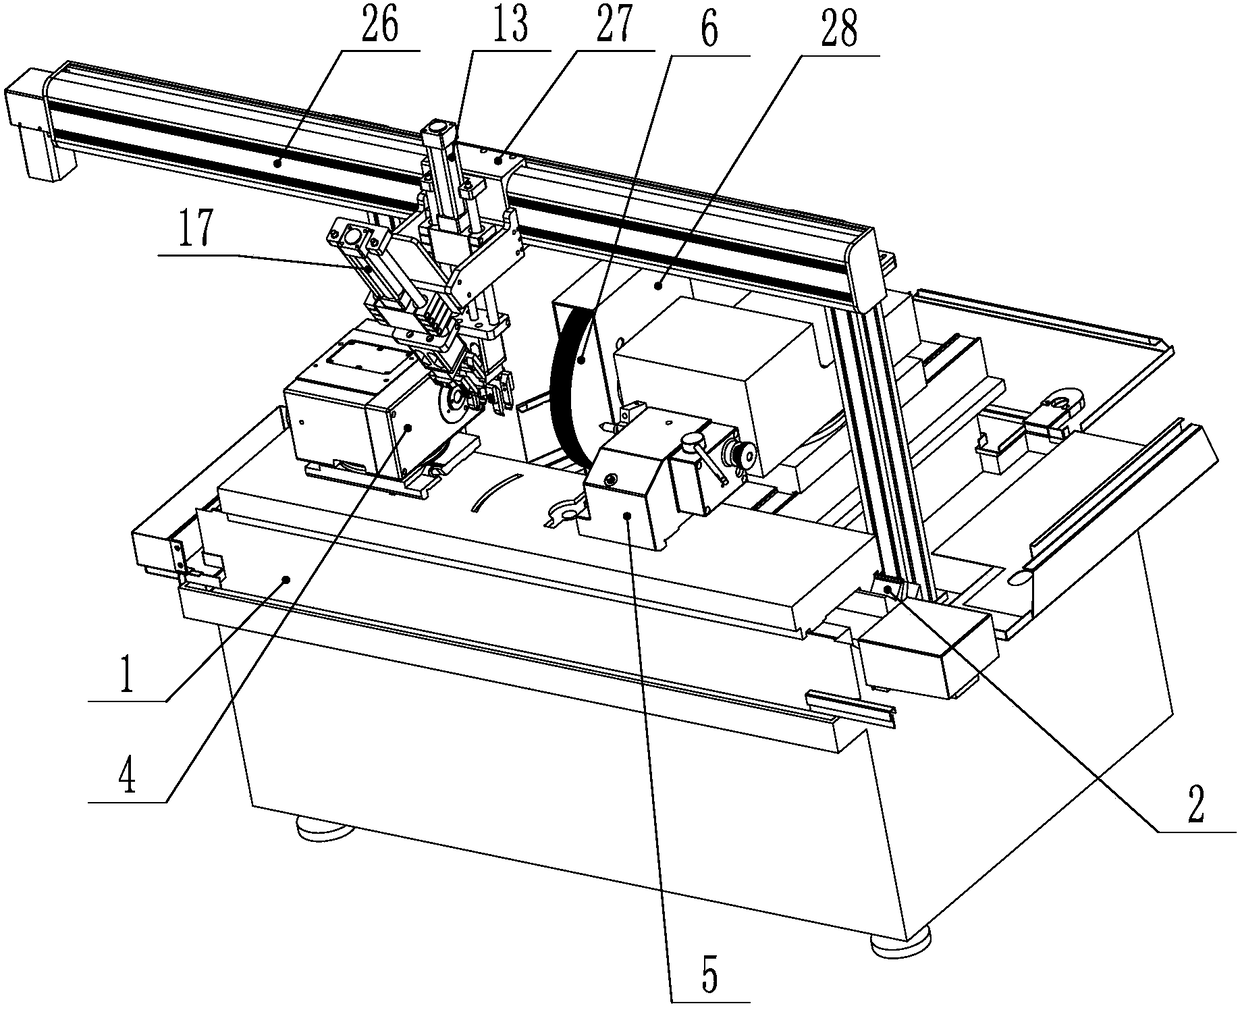 Machine tool for surface treatment of shaft-type workpieces